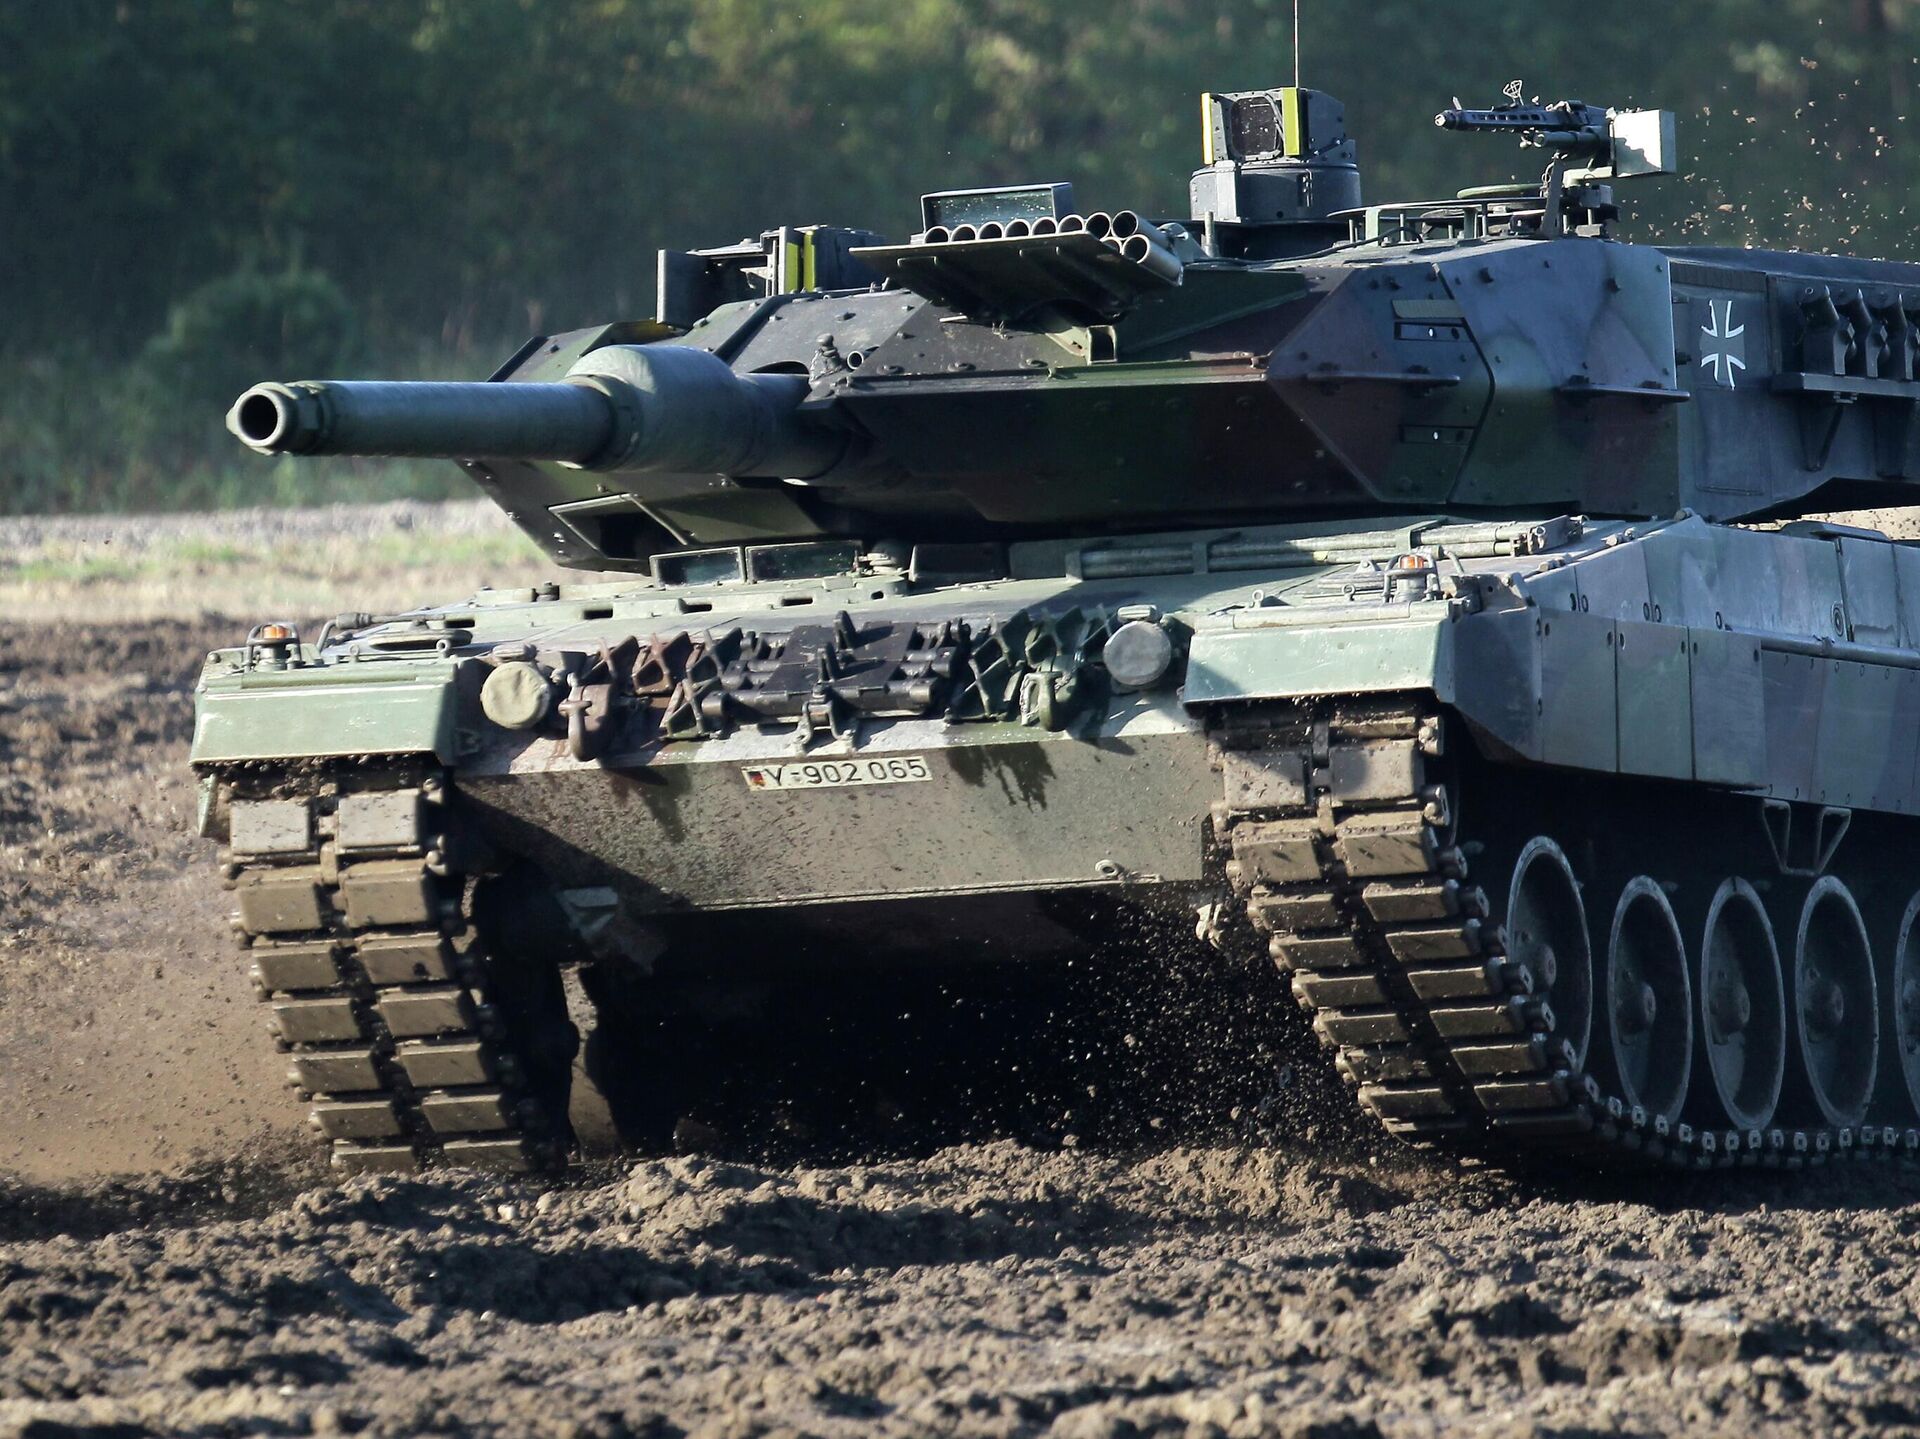 Танк леопард 2а6. Танк леопард 2. Танк Leopard 3. Leopard 2a6 Germany.